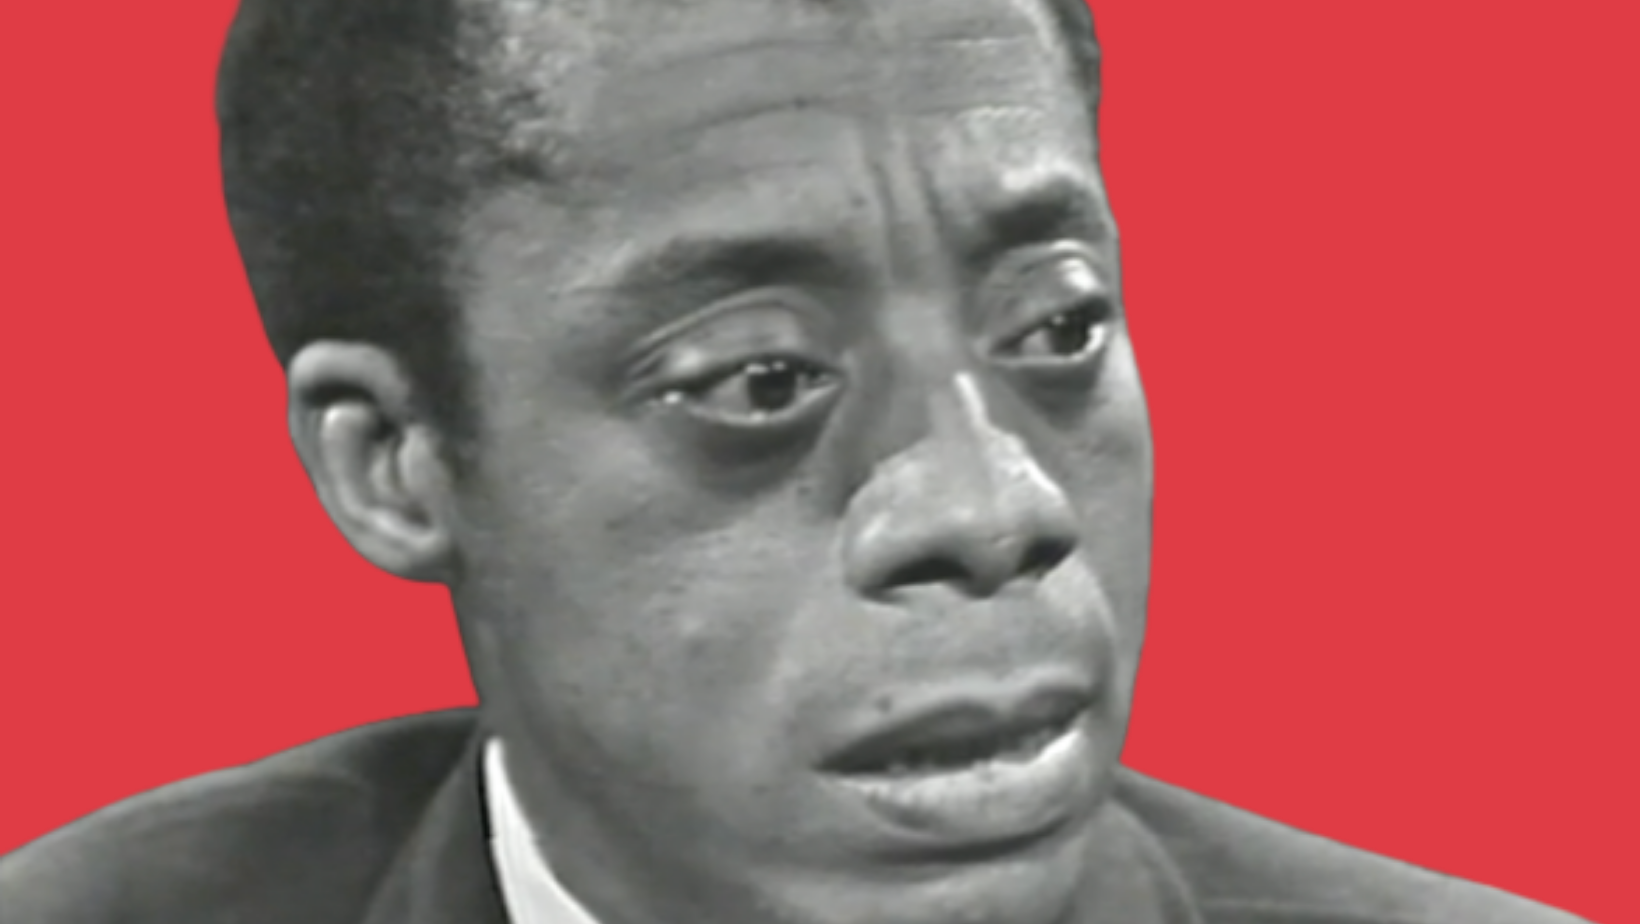 James Baldwin Confronts the Realities of Race in America pic